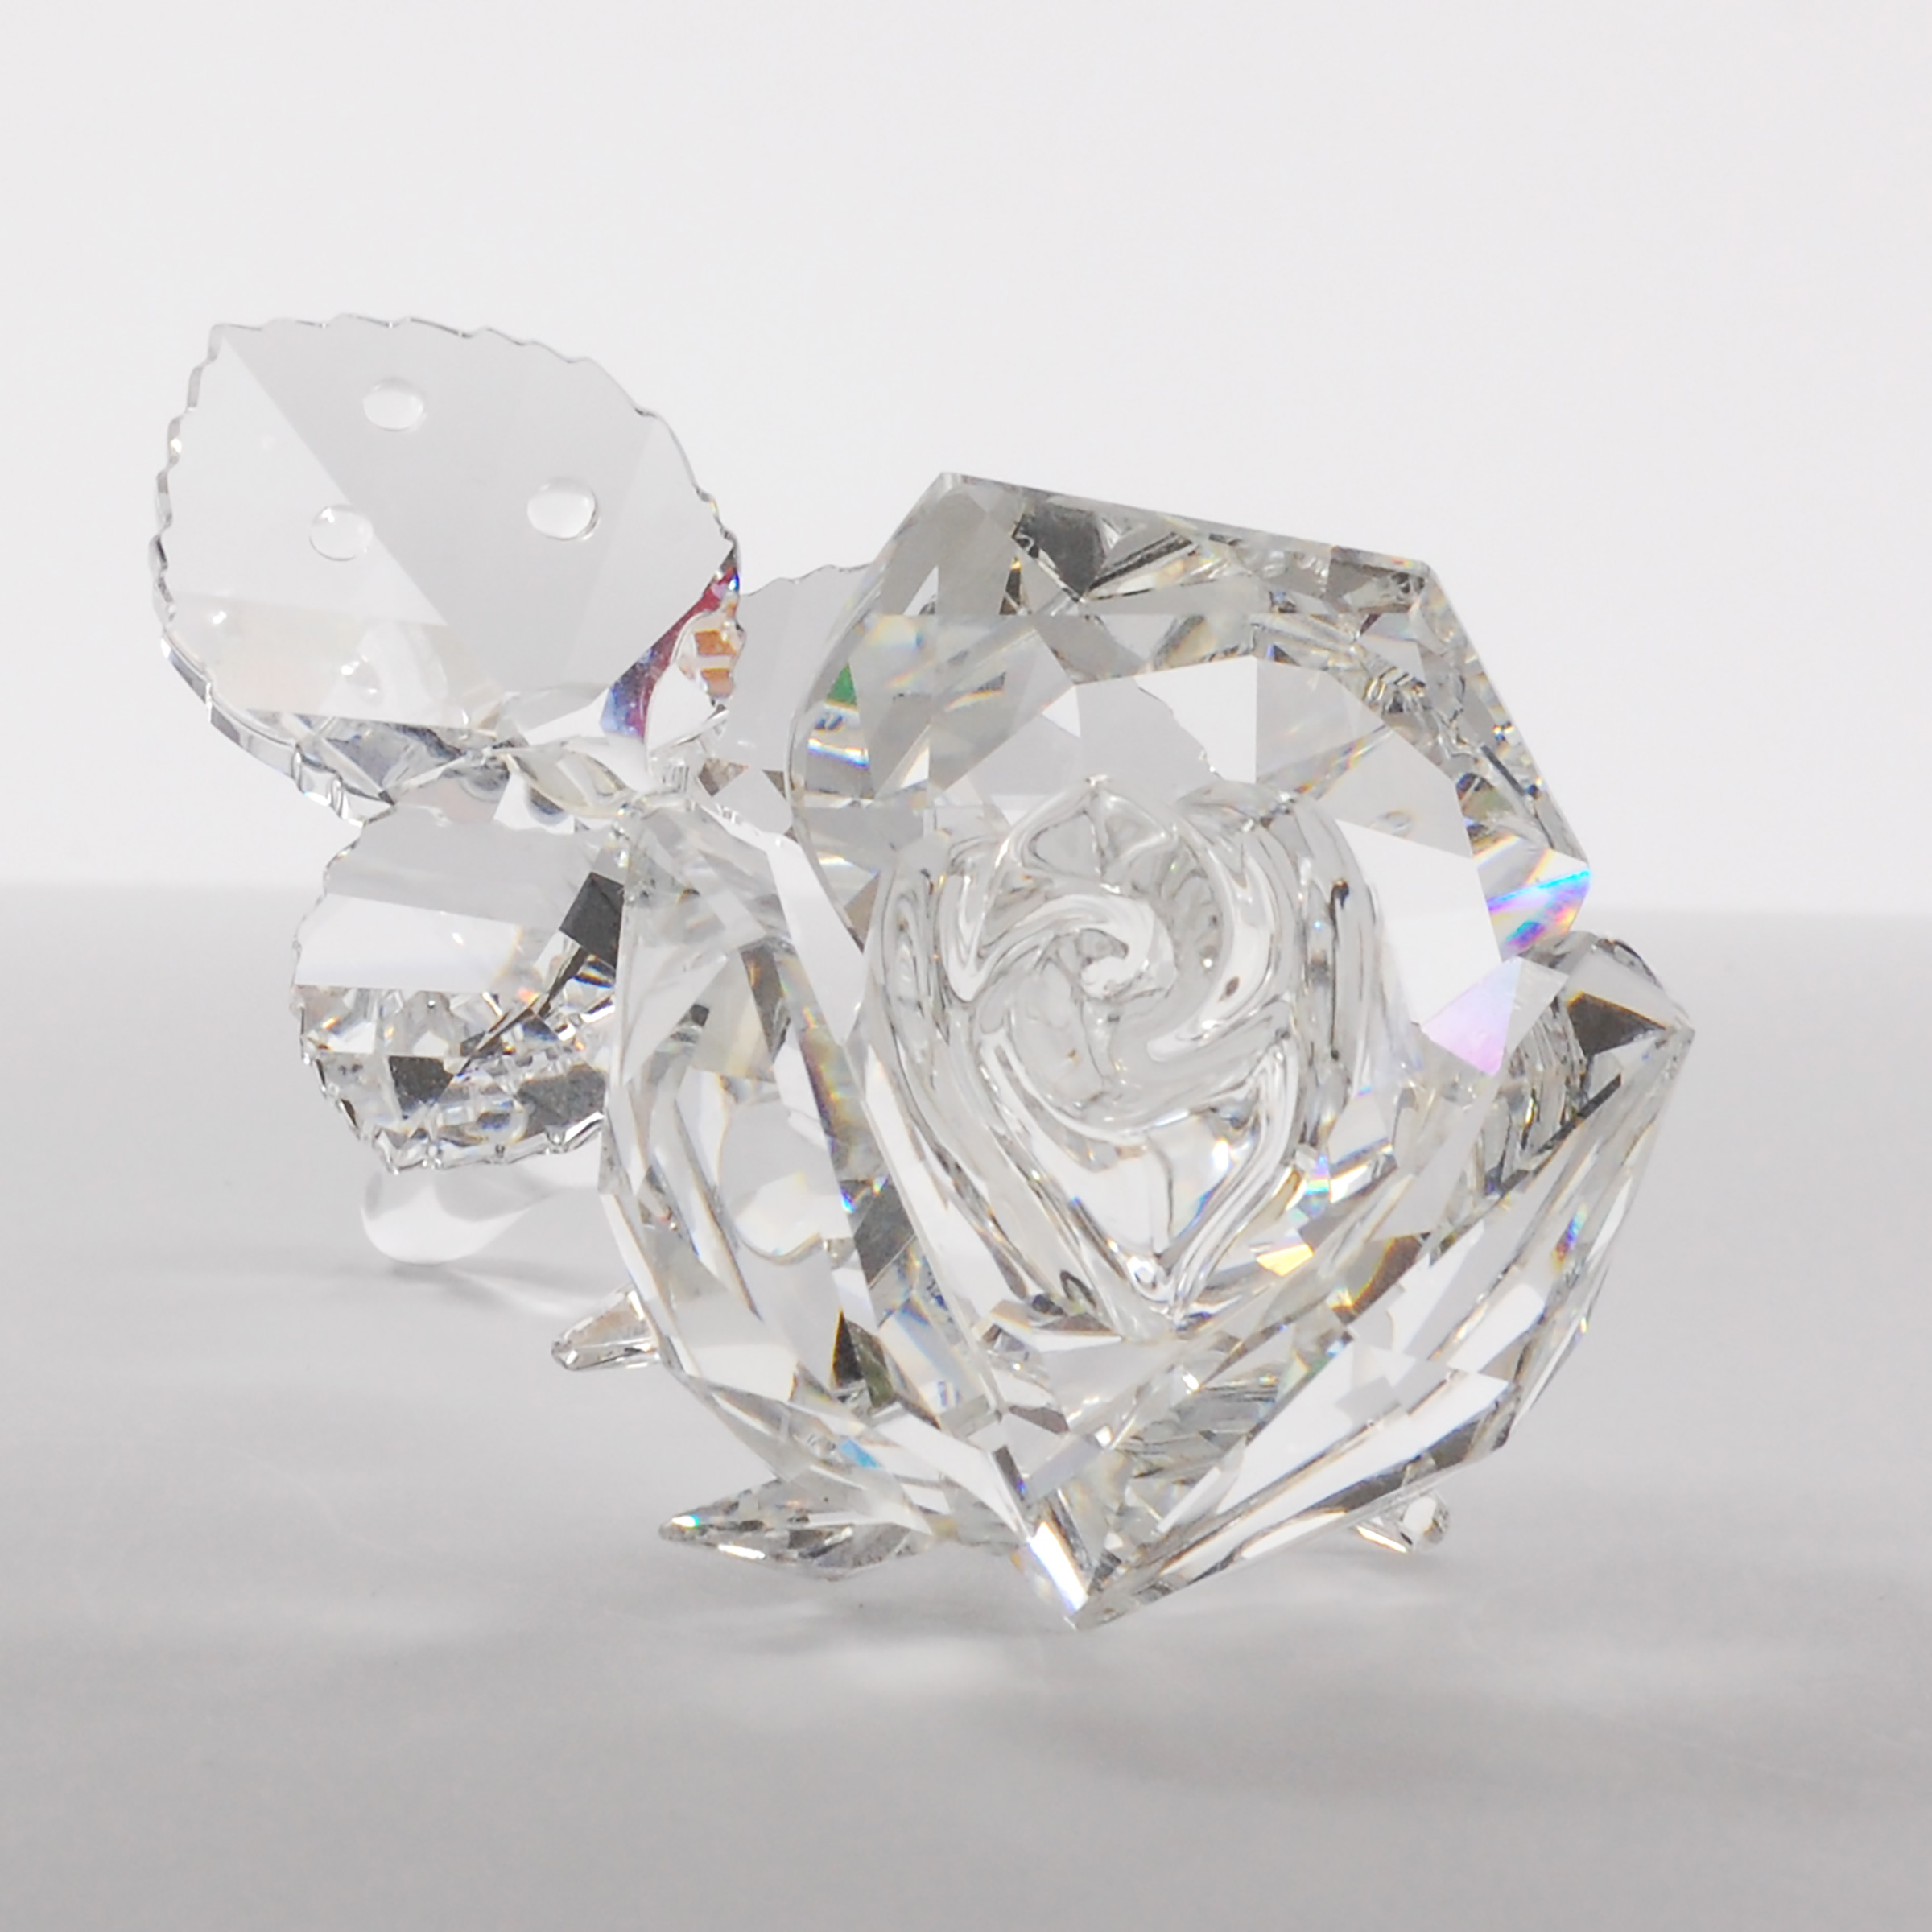 Five Swarovski Crystal Decorative Objects, late 20th/early 21st century